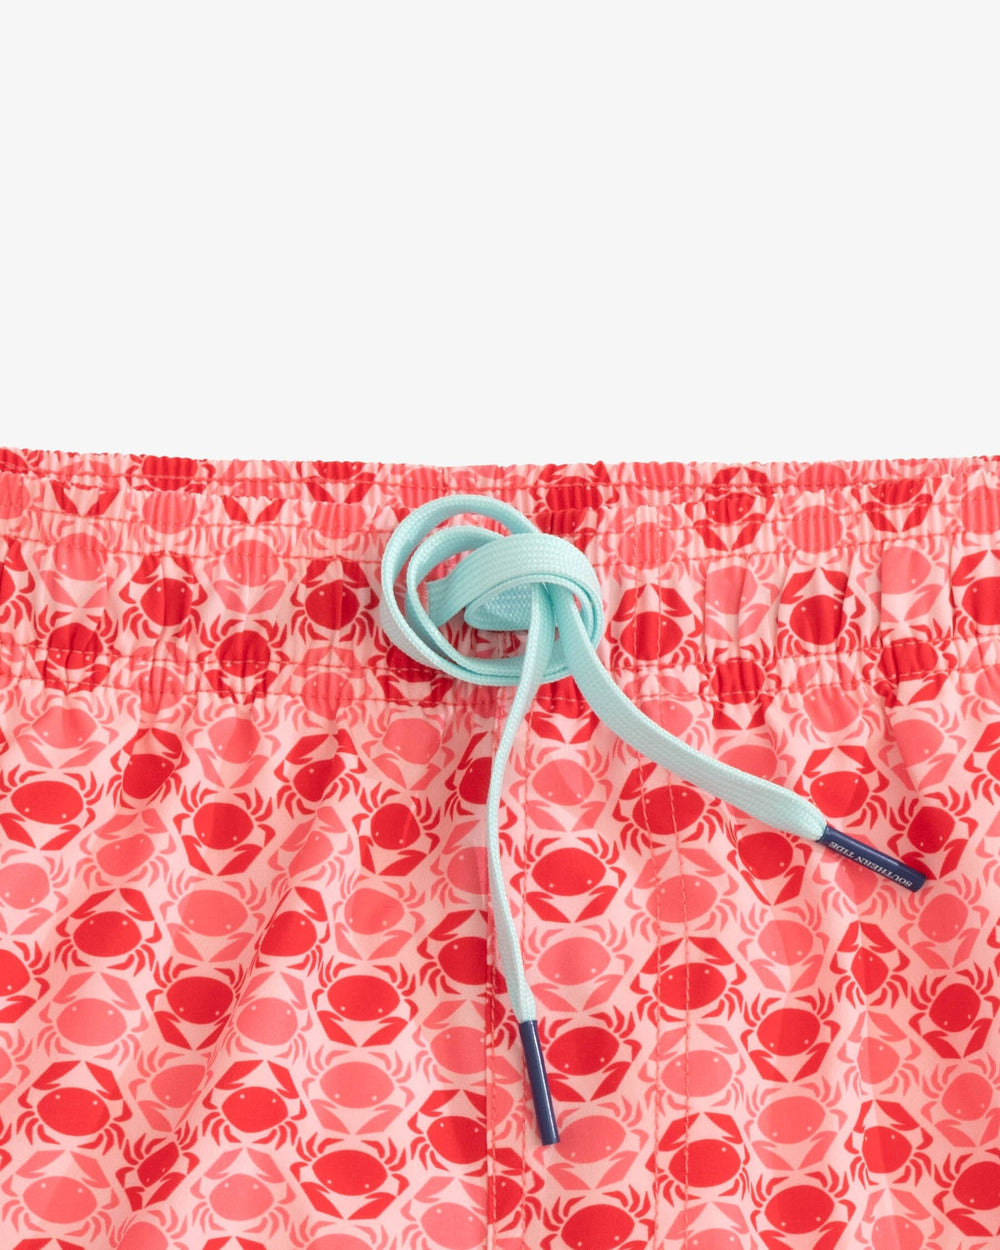 The detail view of the Southern Tide Why So Crabby Printed Swim Trunk by Southern Tide - Rose Blush